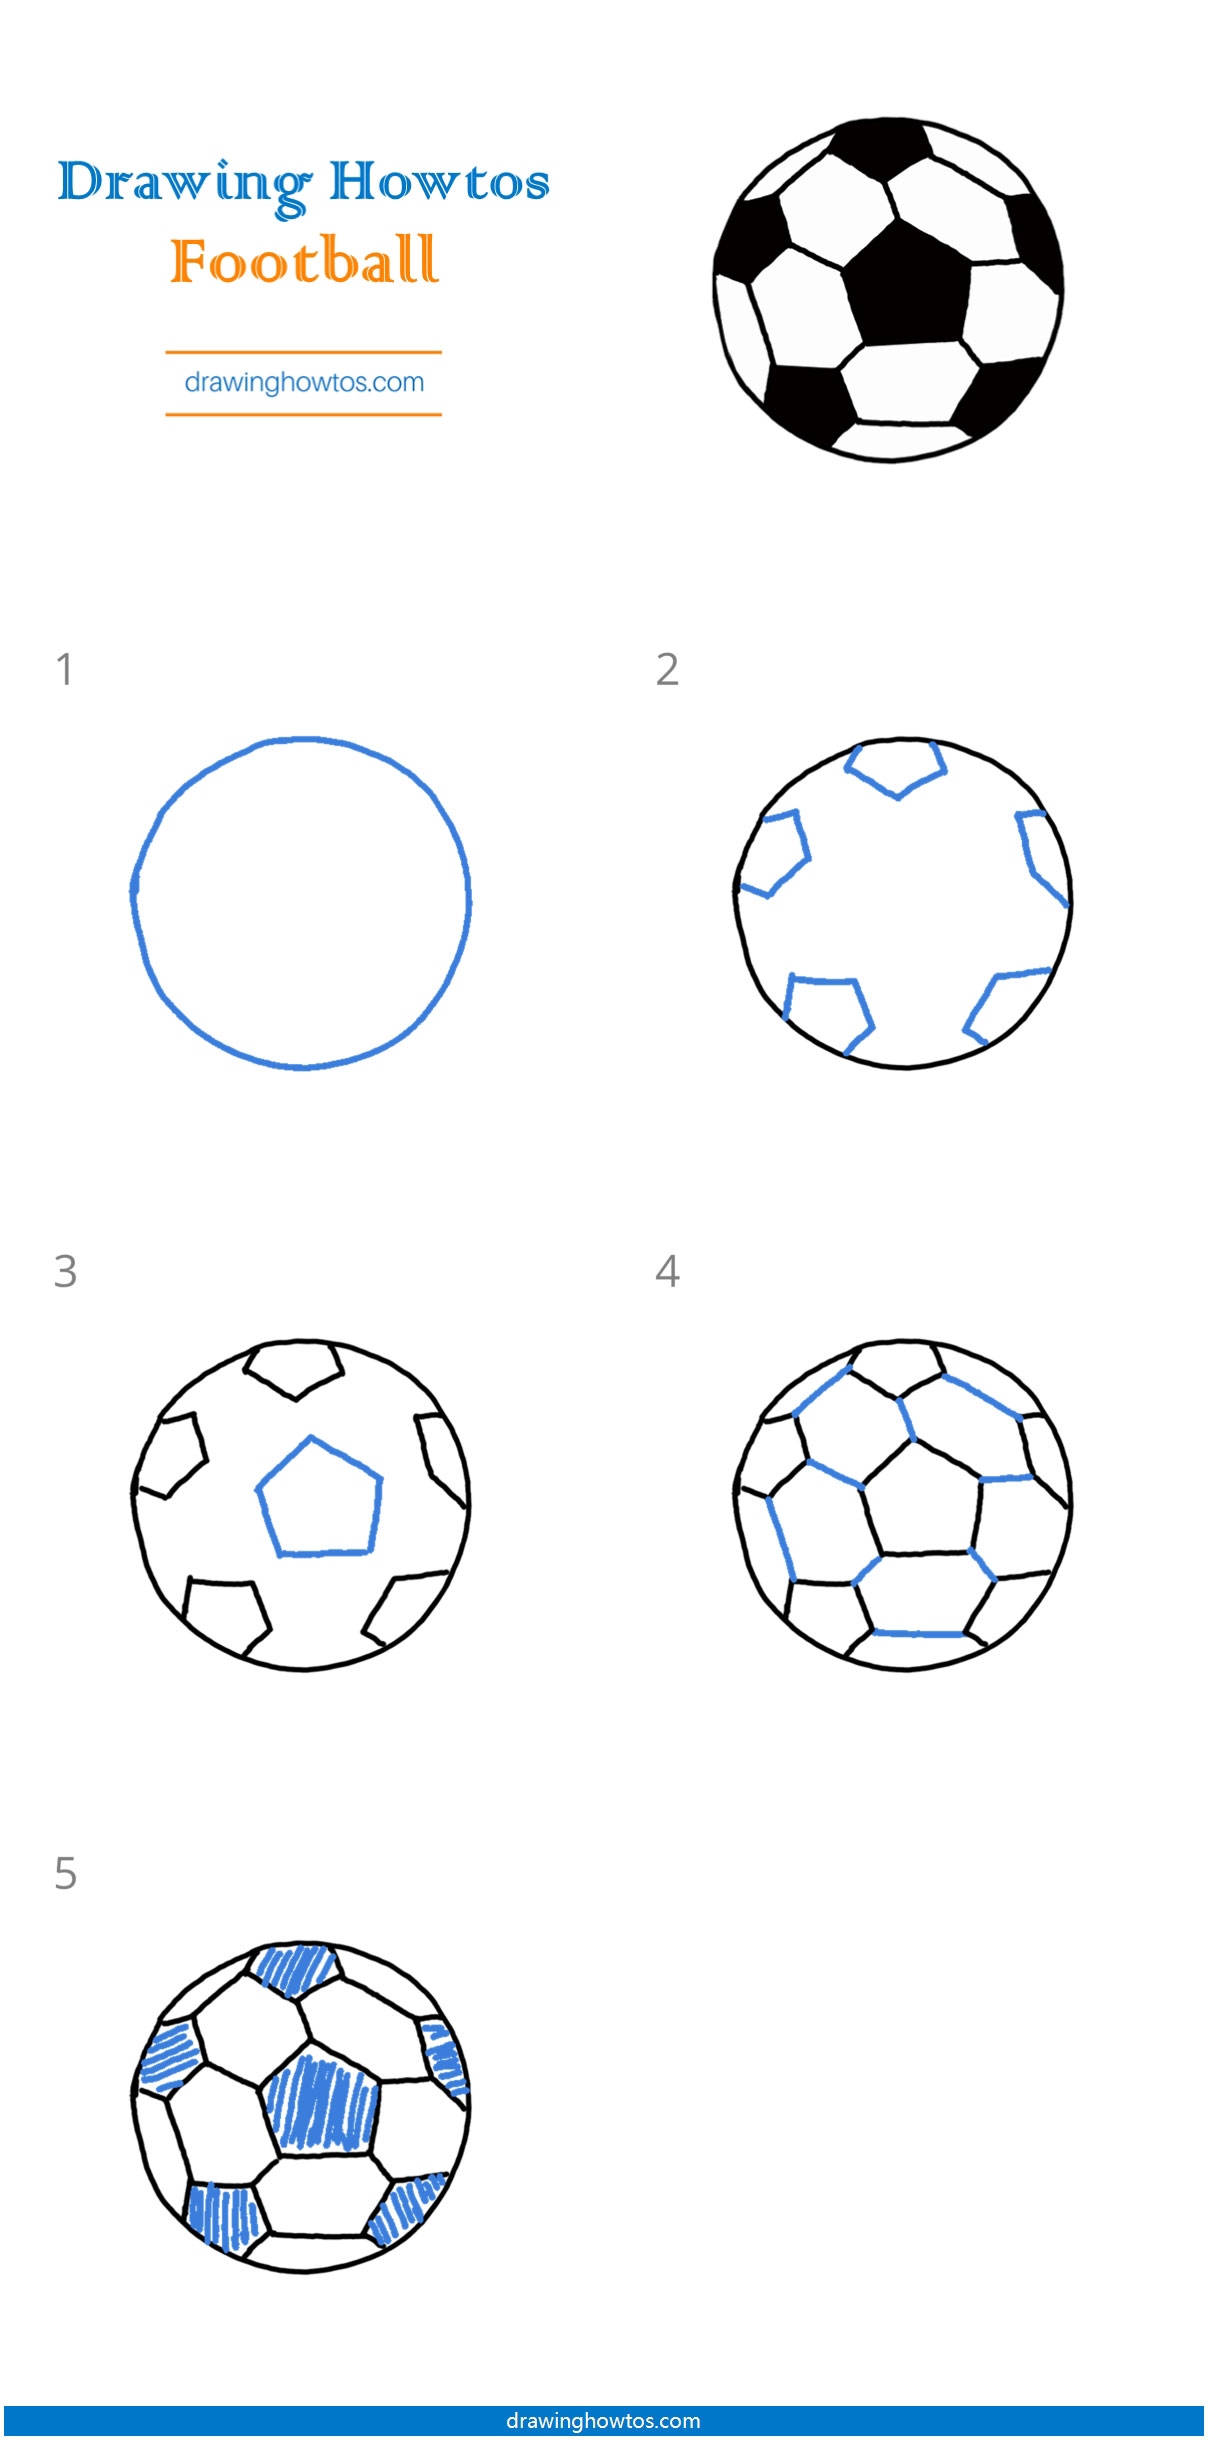 How to Draw a Football Step by Step